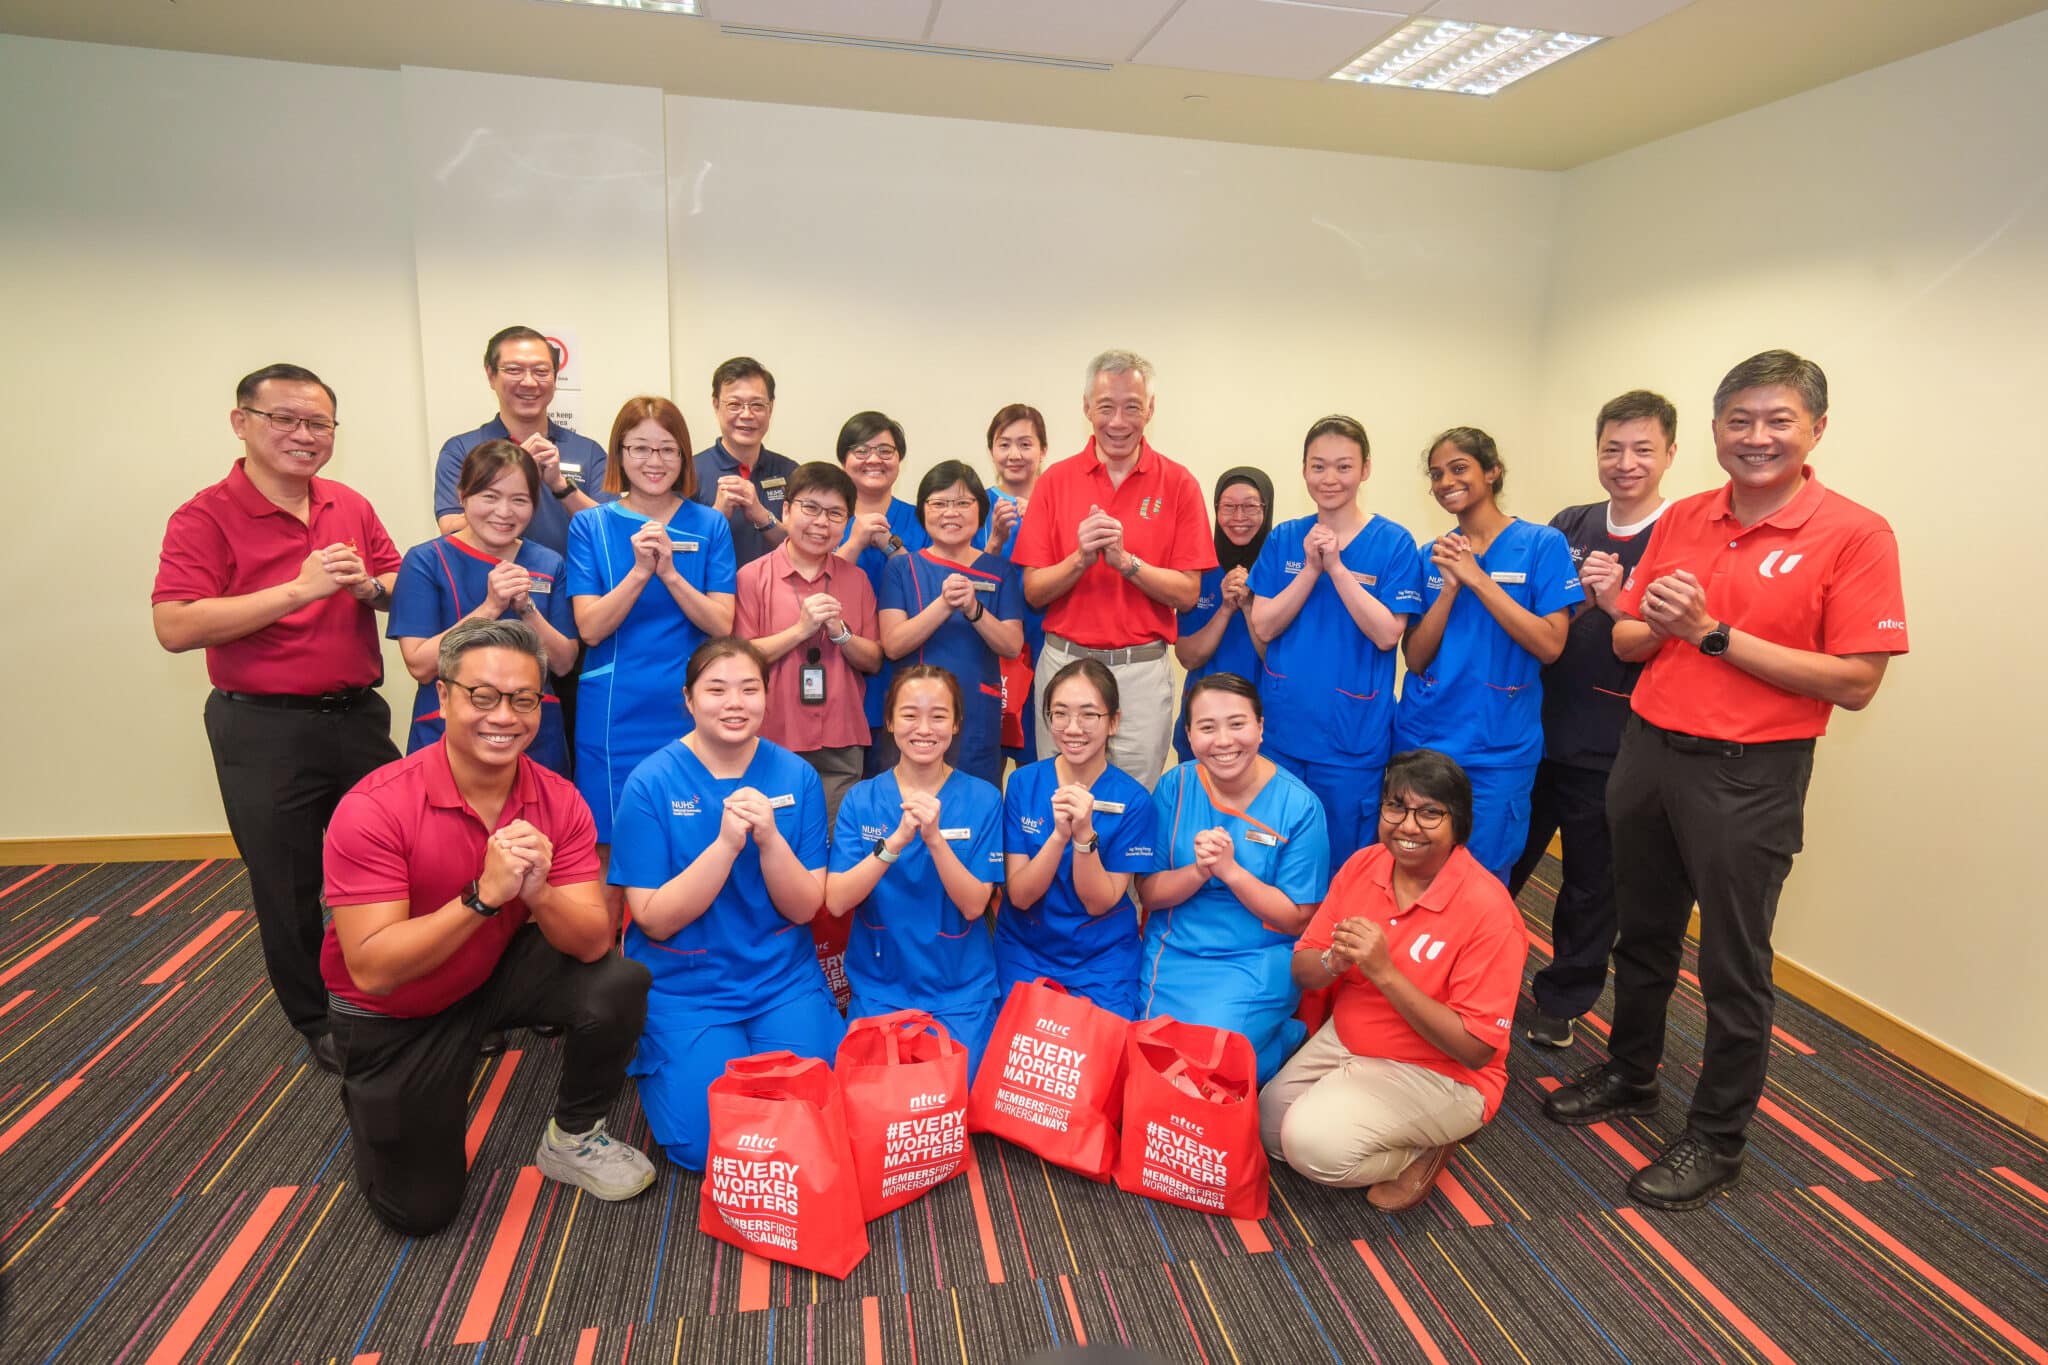 PM Lee & NTUC give thanks to healthcare workers on Lunar New Year's Eve